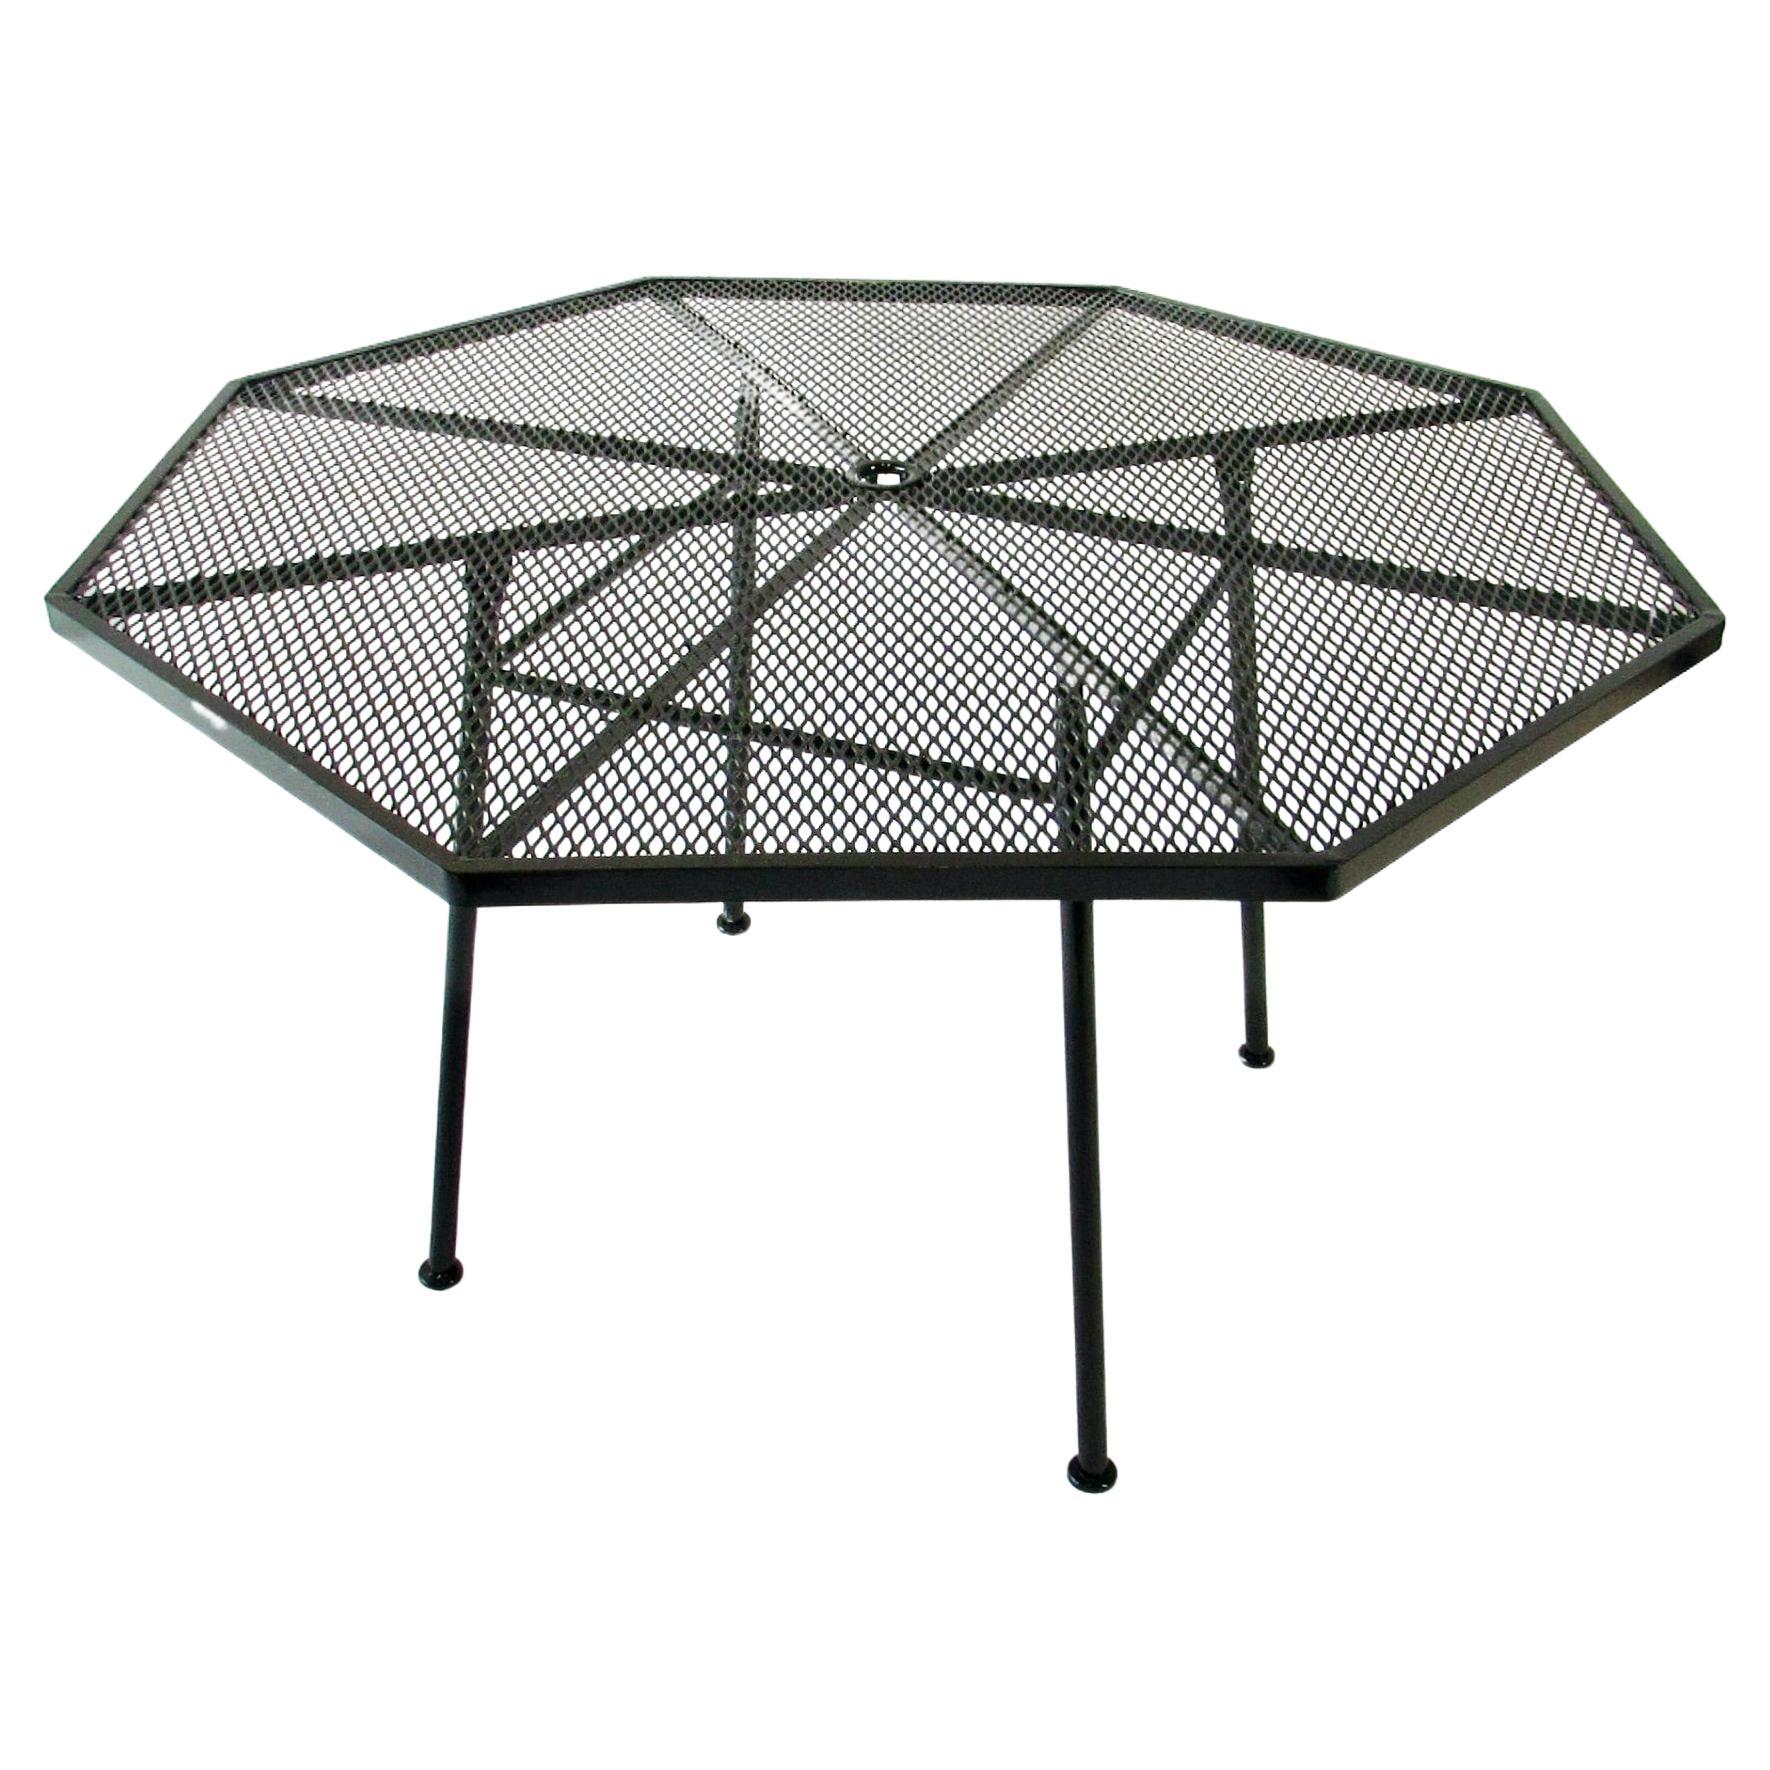 Woodard wrought iron octagon dining height table with fresh gloss black finish 